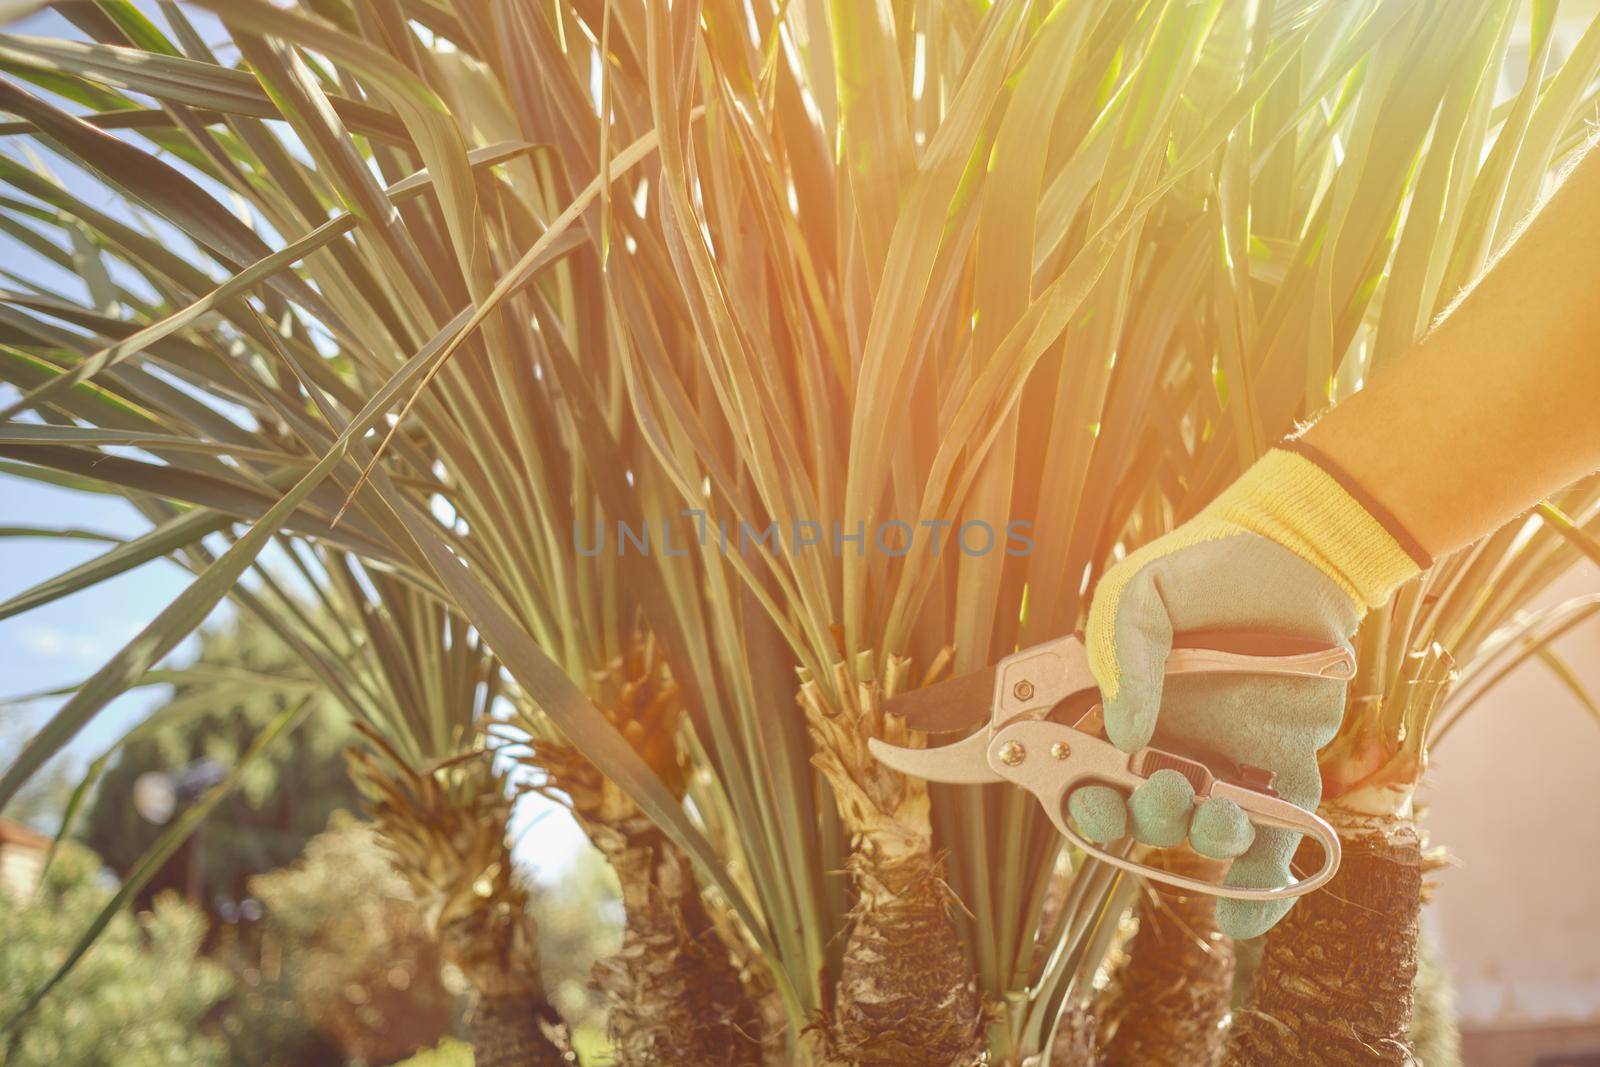 Hand of unknown worker in colorful glove is cutting green yucca or small palm tree with pruning shears on sunny backyard. Garden landscaping. Modern pruning tool. Close up